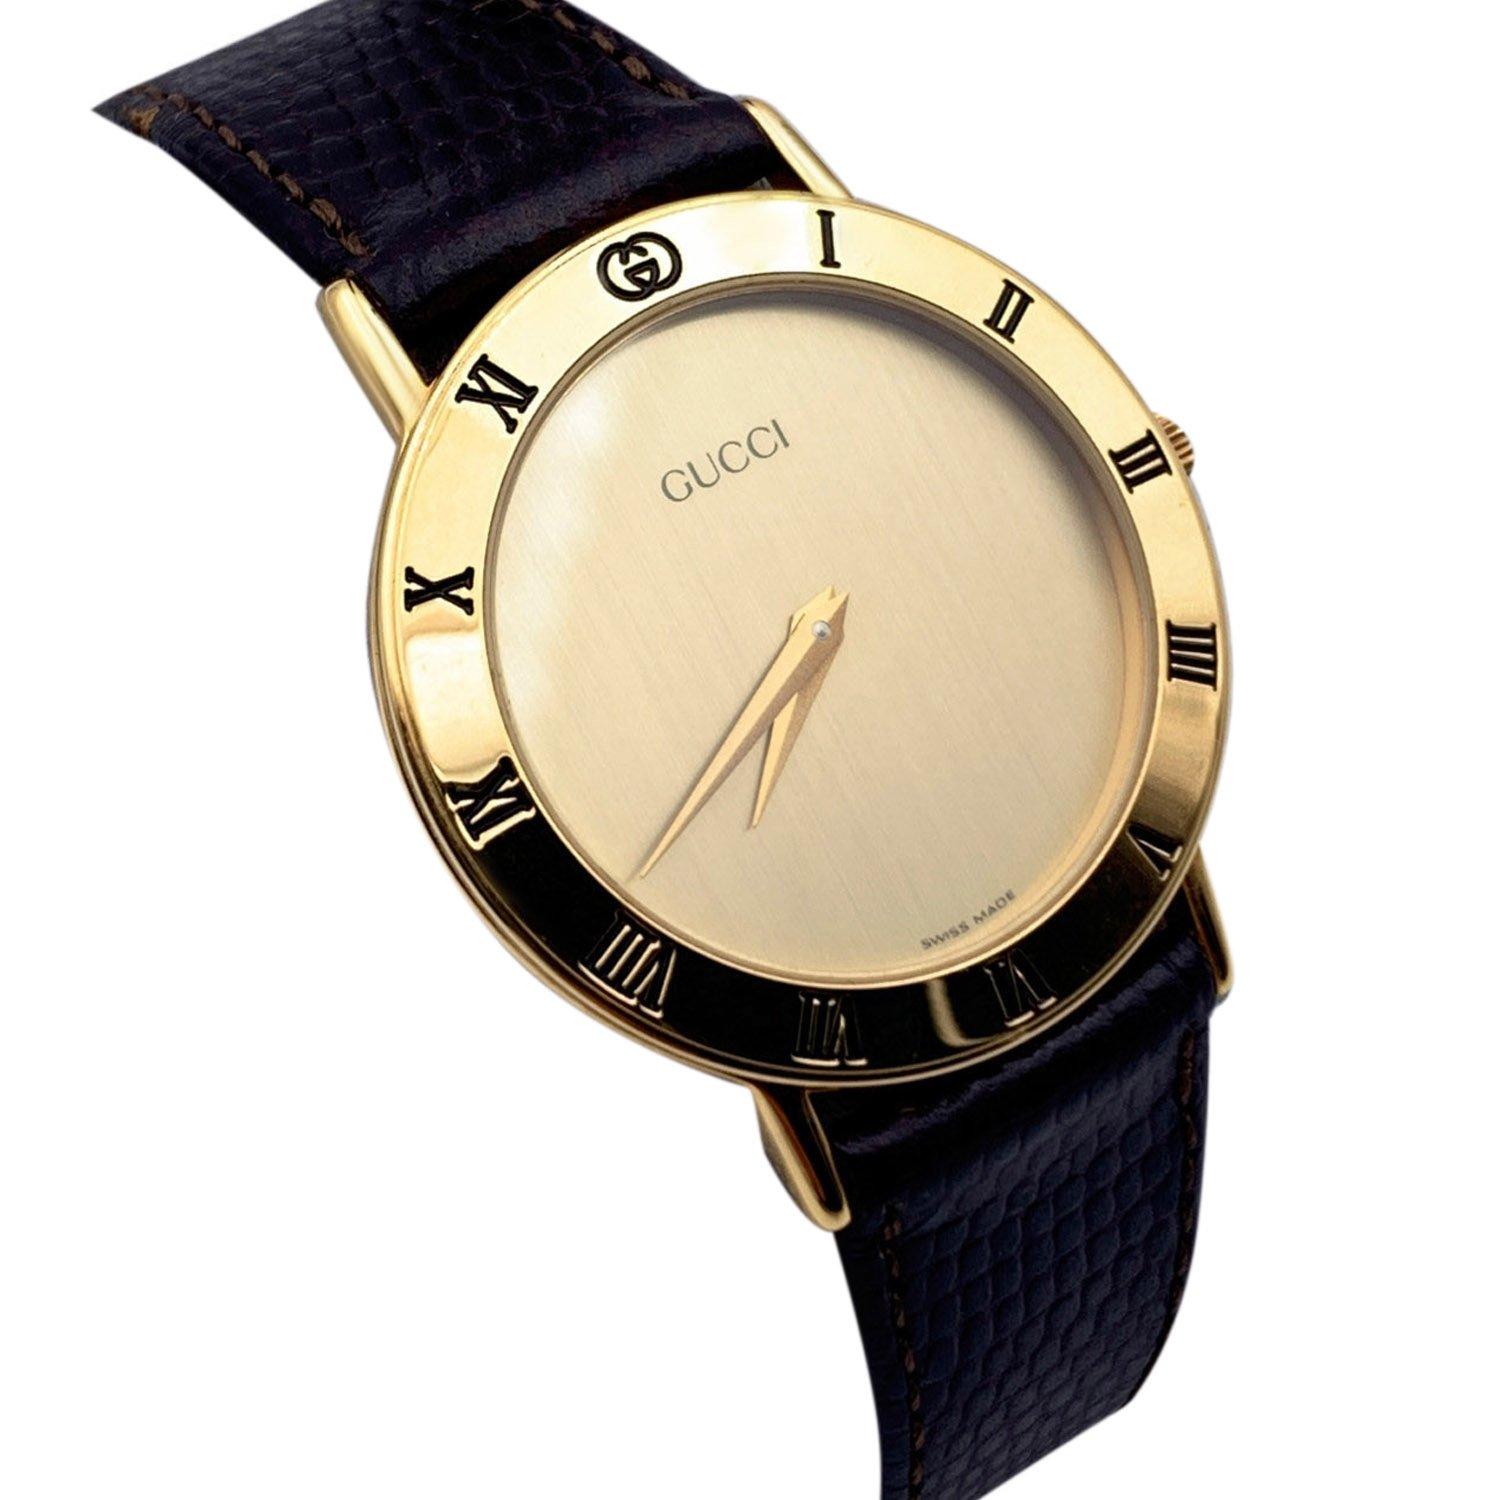 Retro Gucci Watch 1988 - For Sale on 1stDibs | vintage gucci watch 1988, 1988  gucci watch, 1980's gucci watch